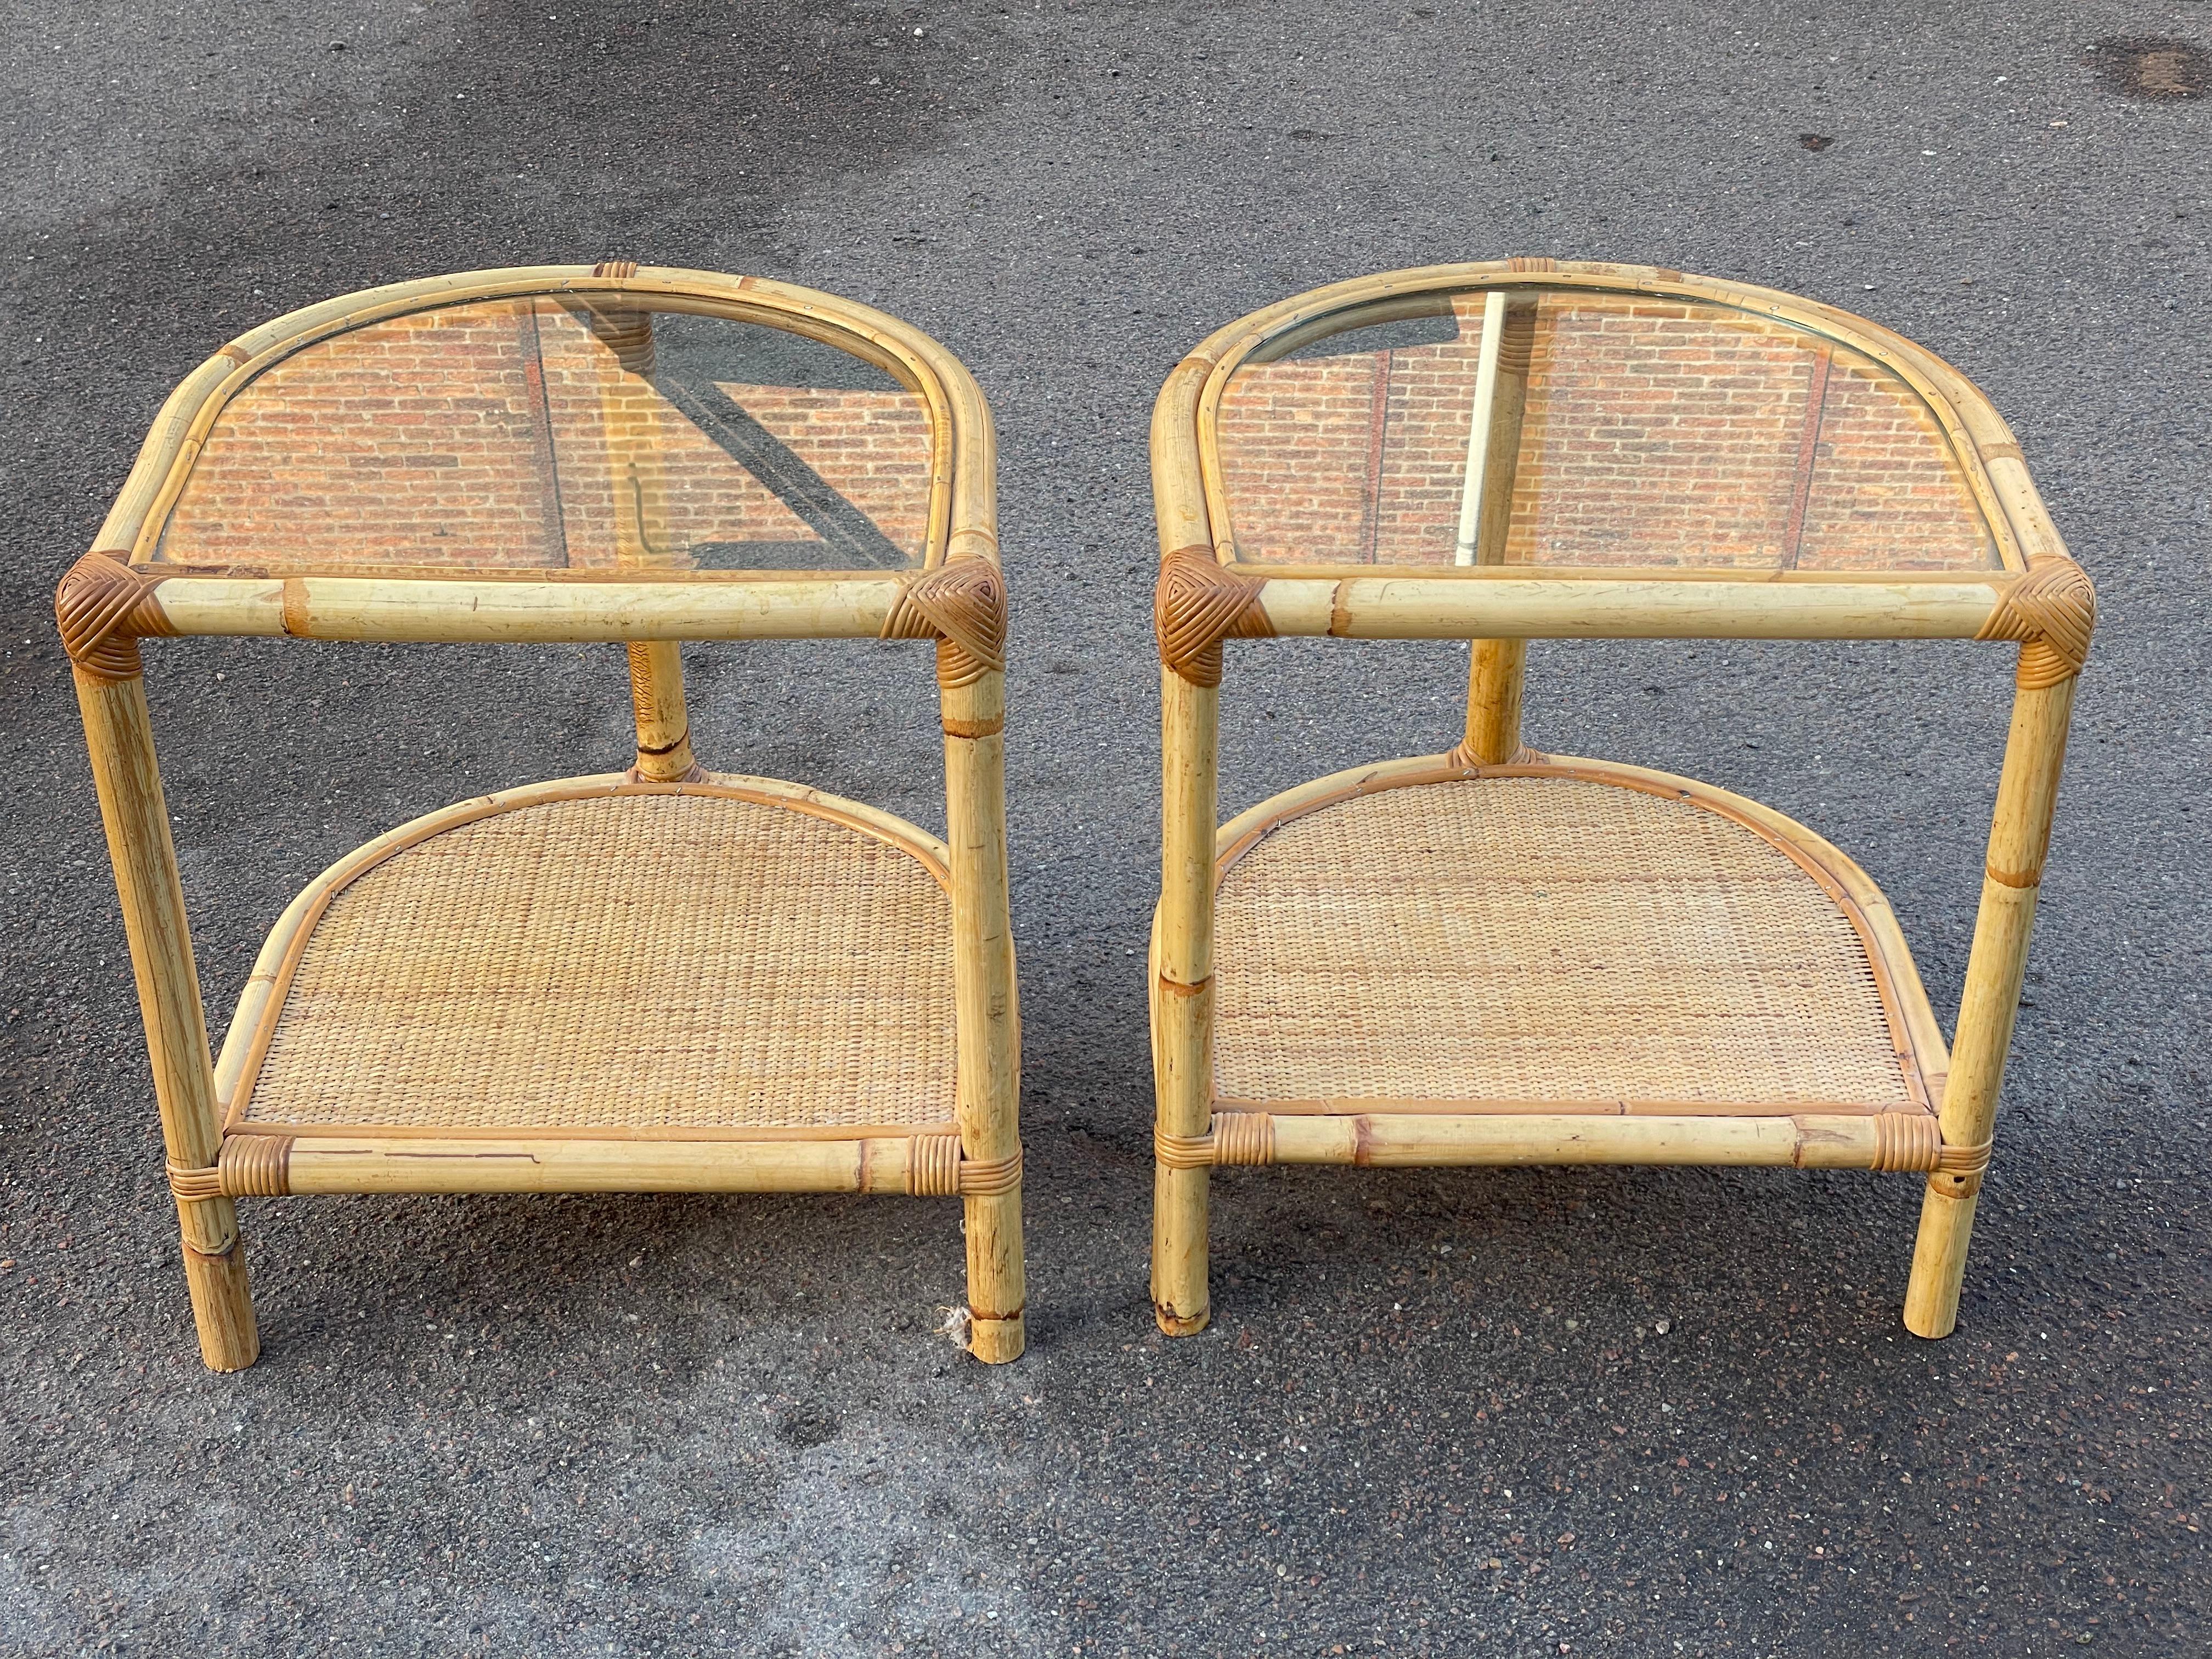 Vintage bamboo rattan nightstands, crafted in Denmark during the 1970s For Sale 4